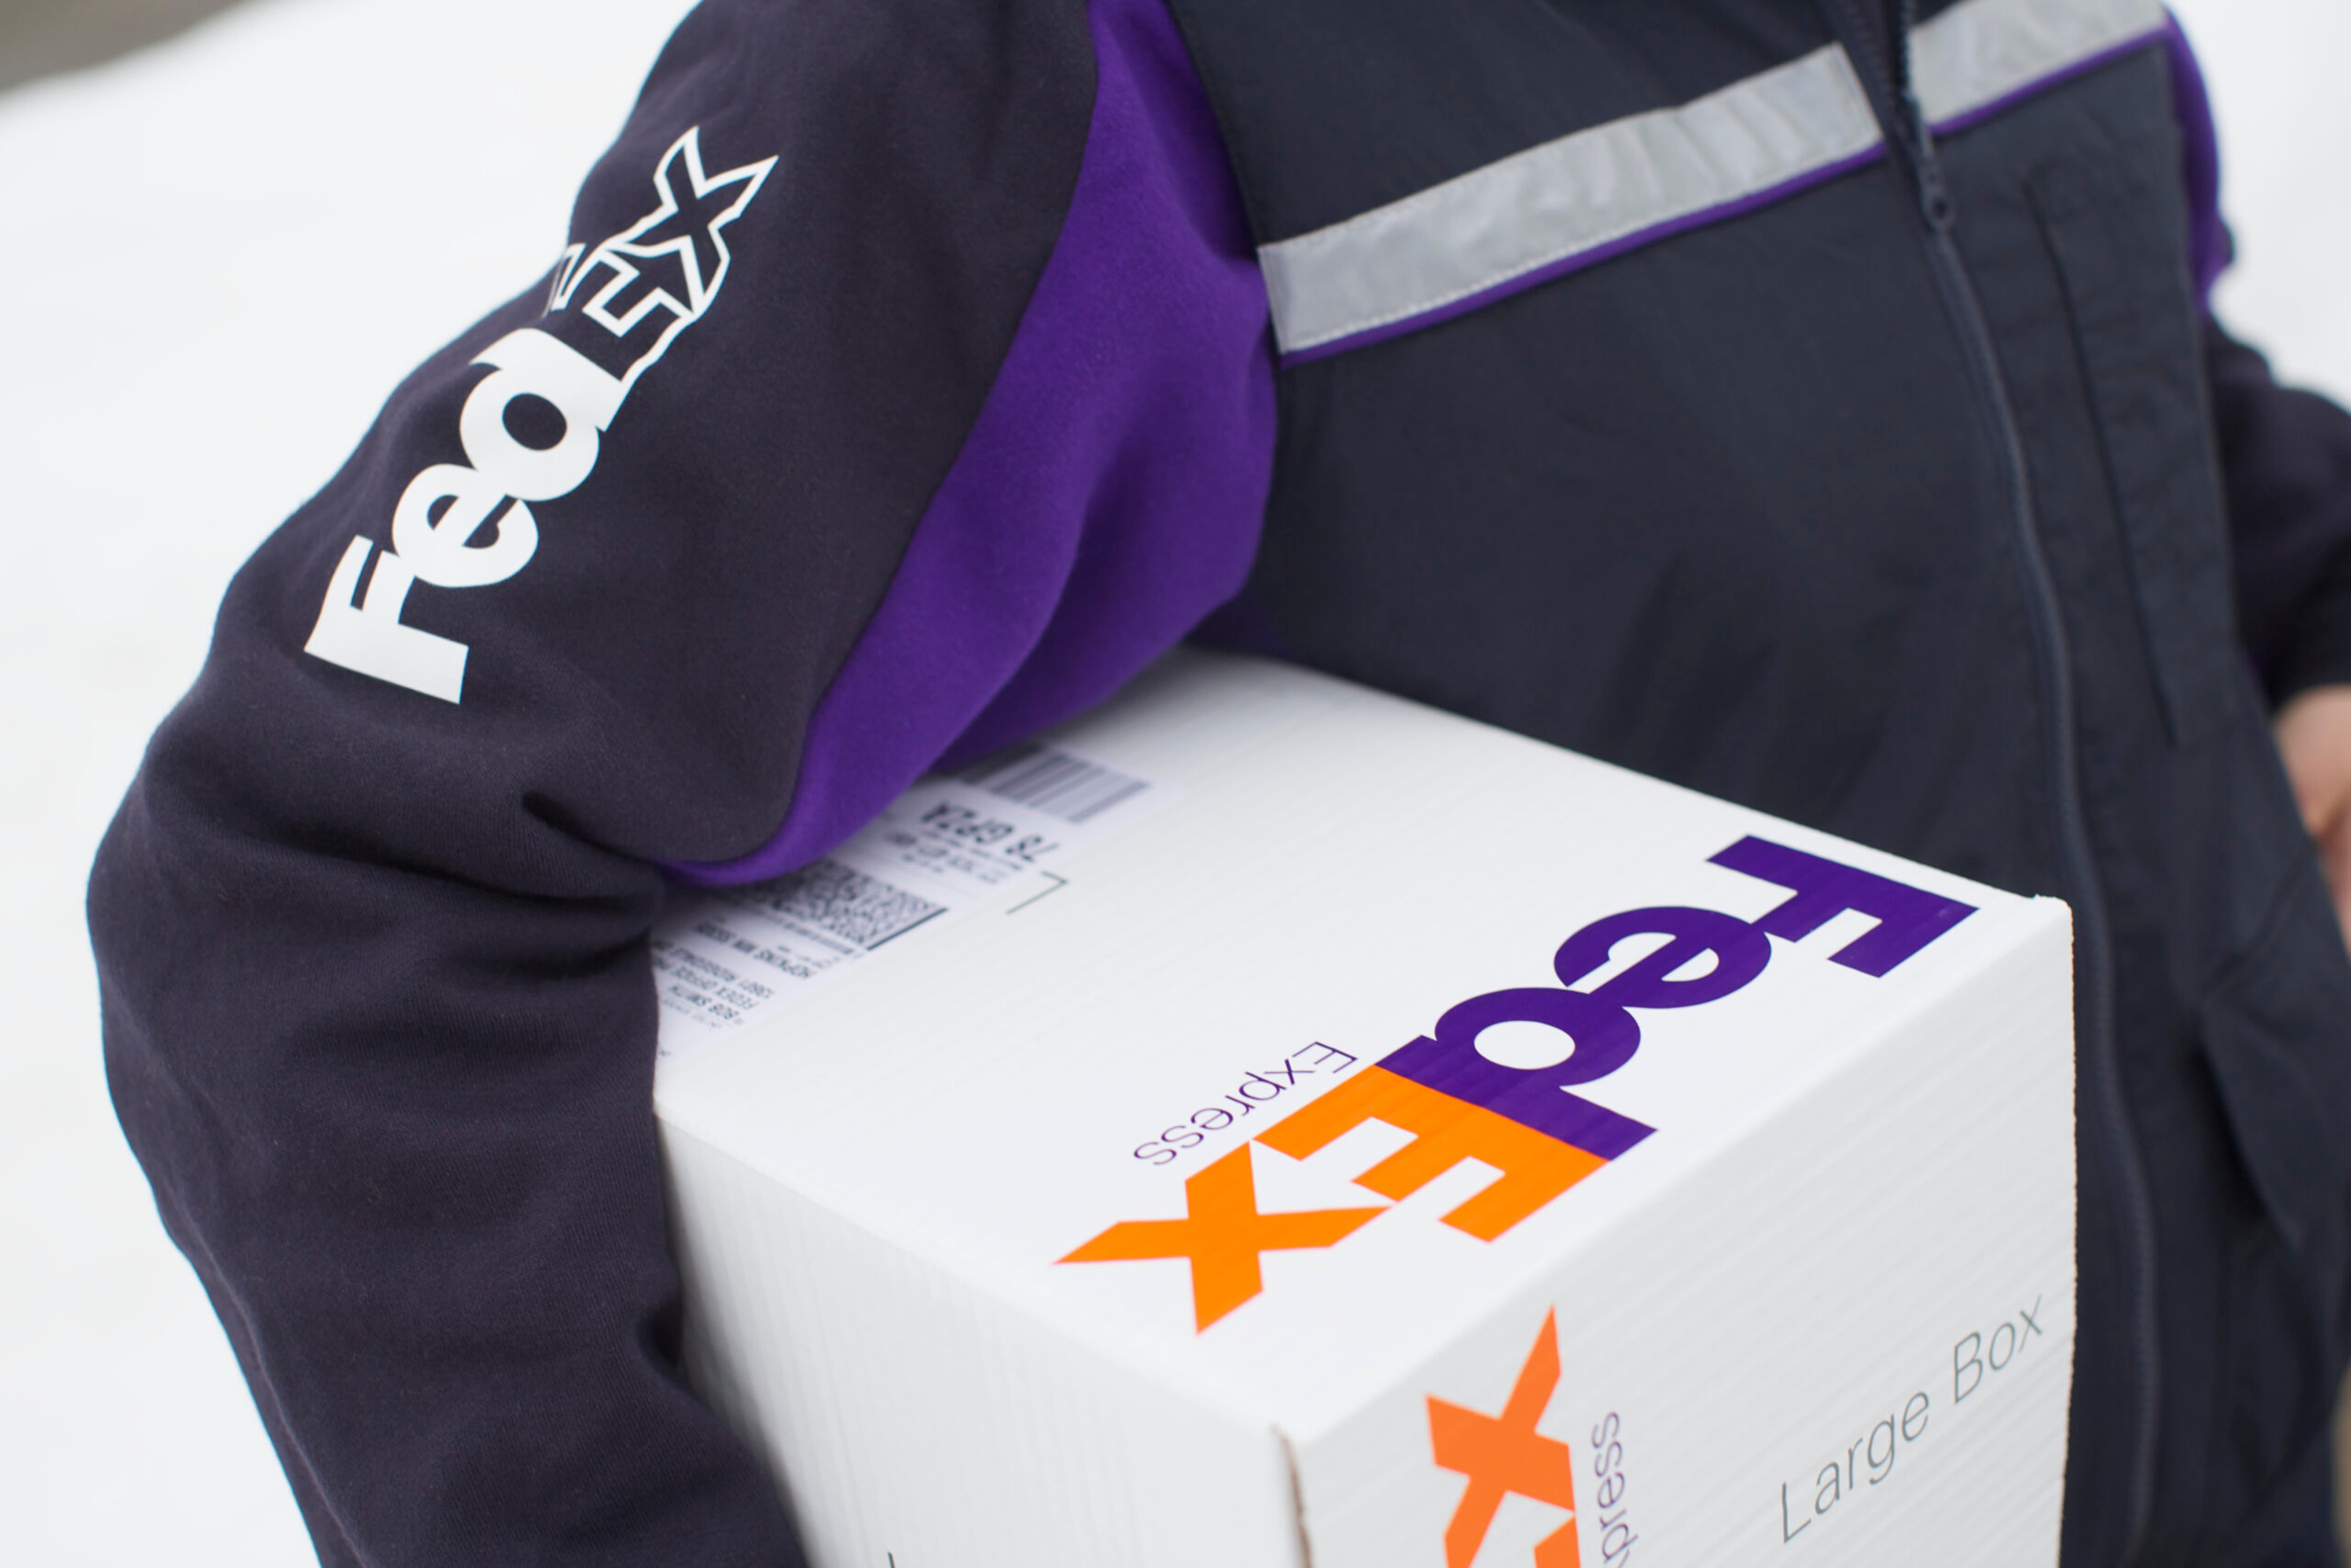 FedEx Q4 Earnings Preview: What Analysts Expect And How The Company Serves As A Bellwether For Economy